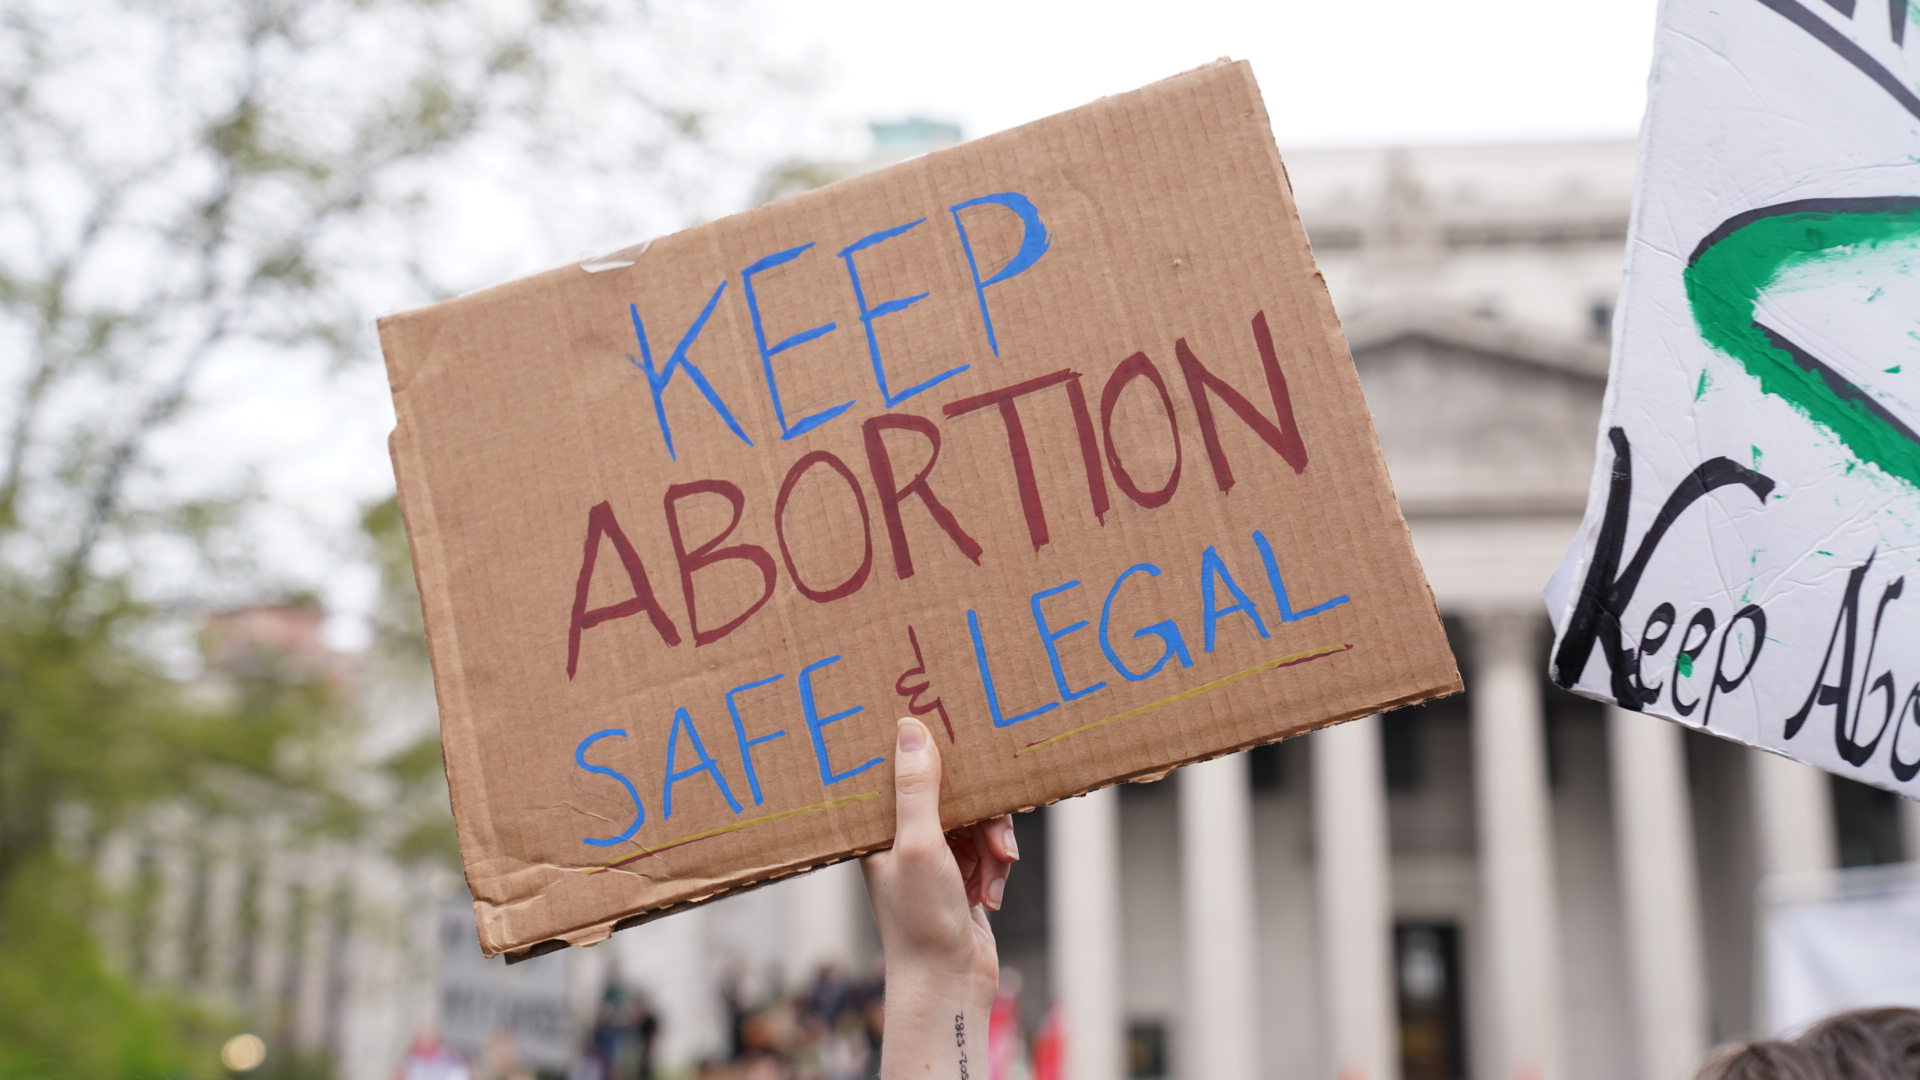 A pro-abortion sign at a rally in New York.